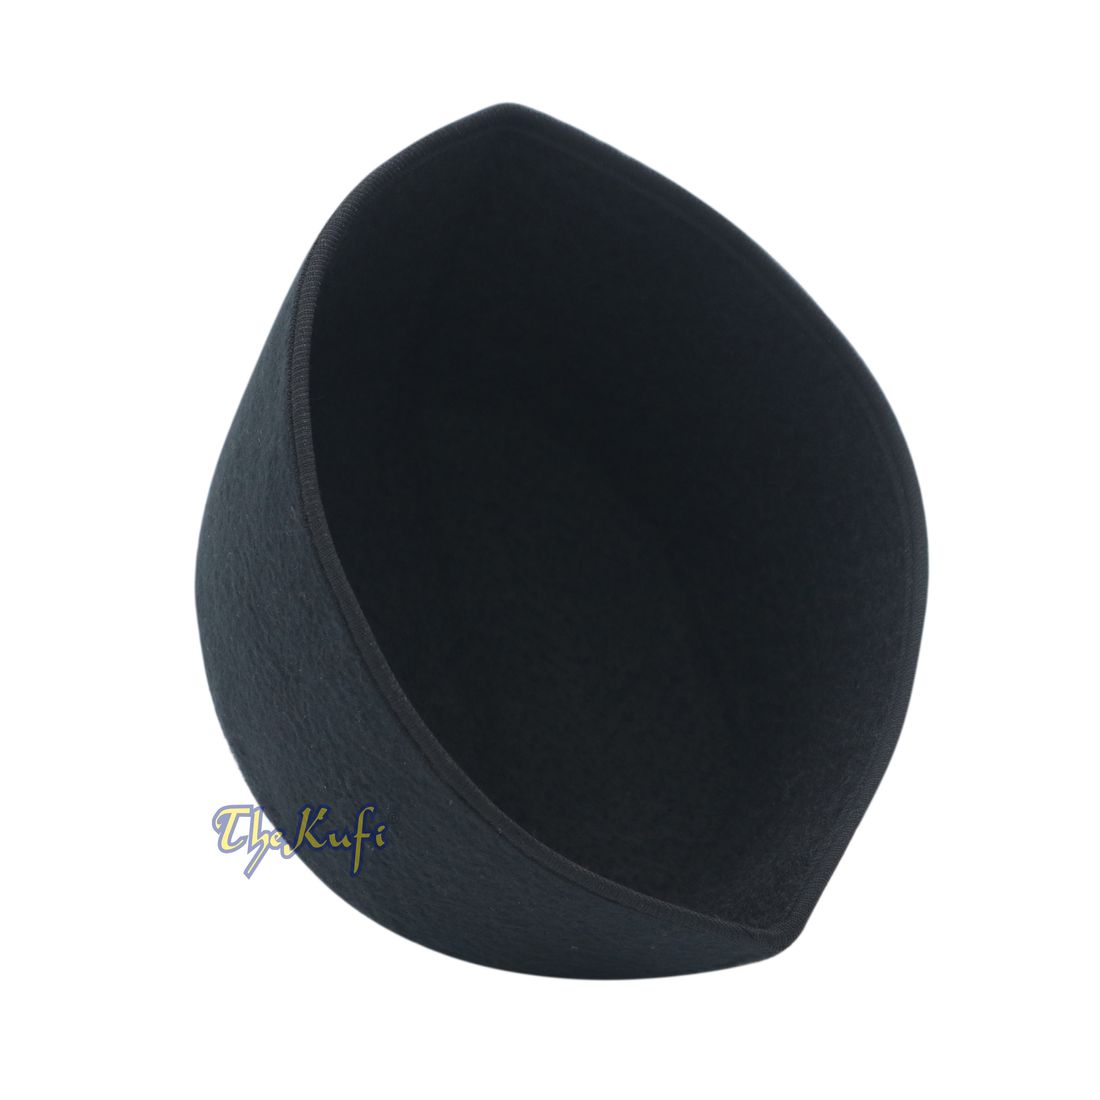 Handmade Black Fez-style Kufi Crown with Tip